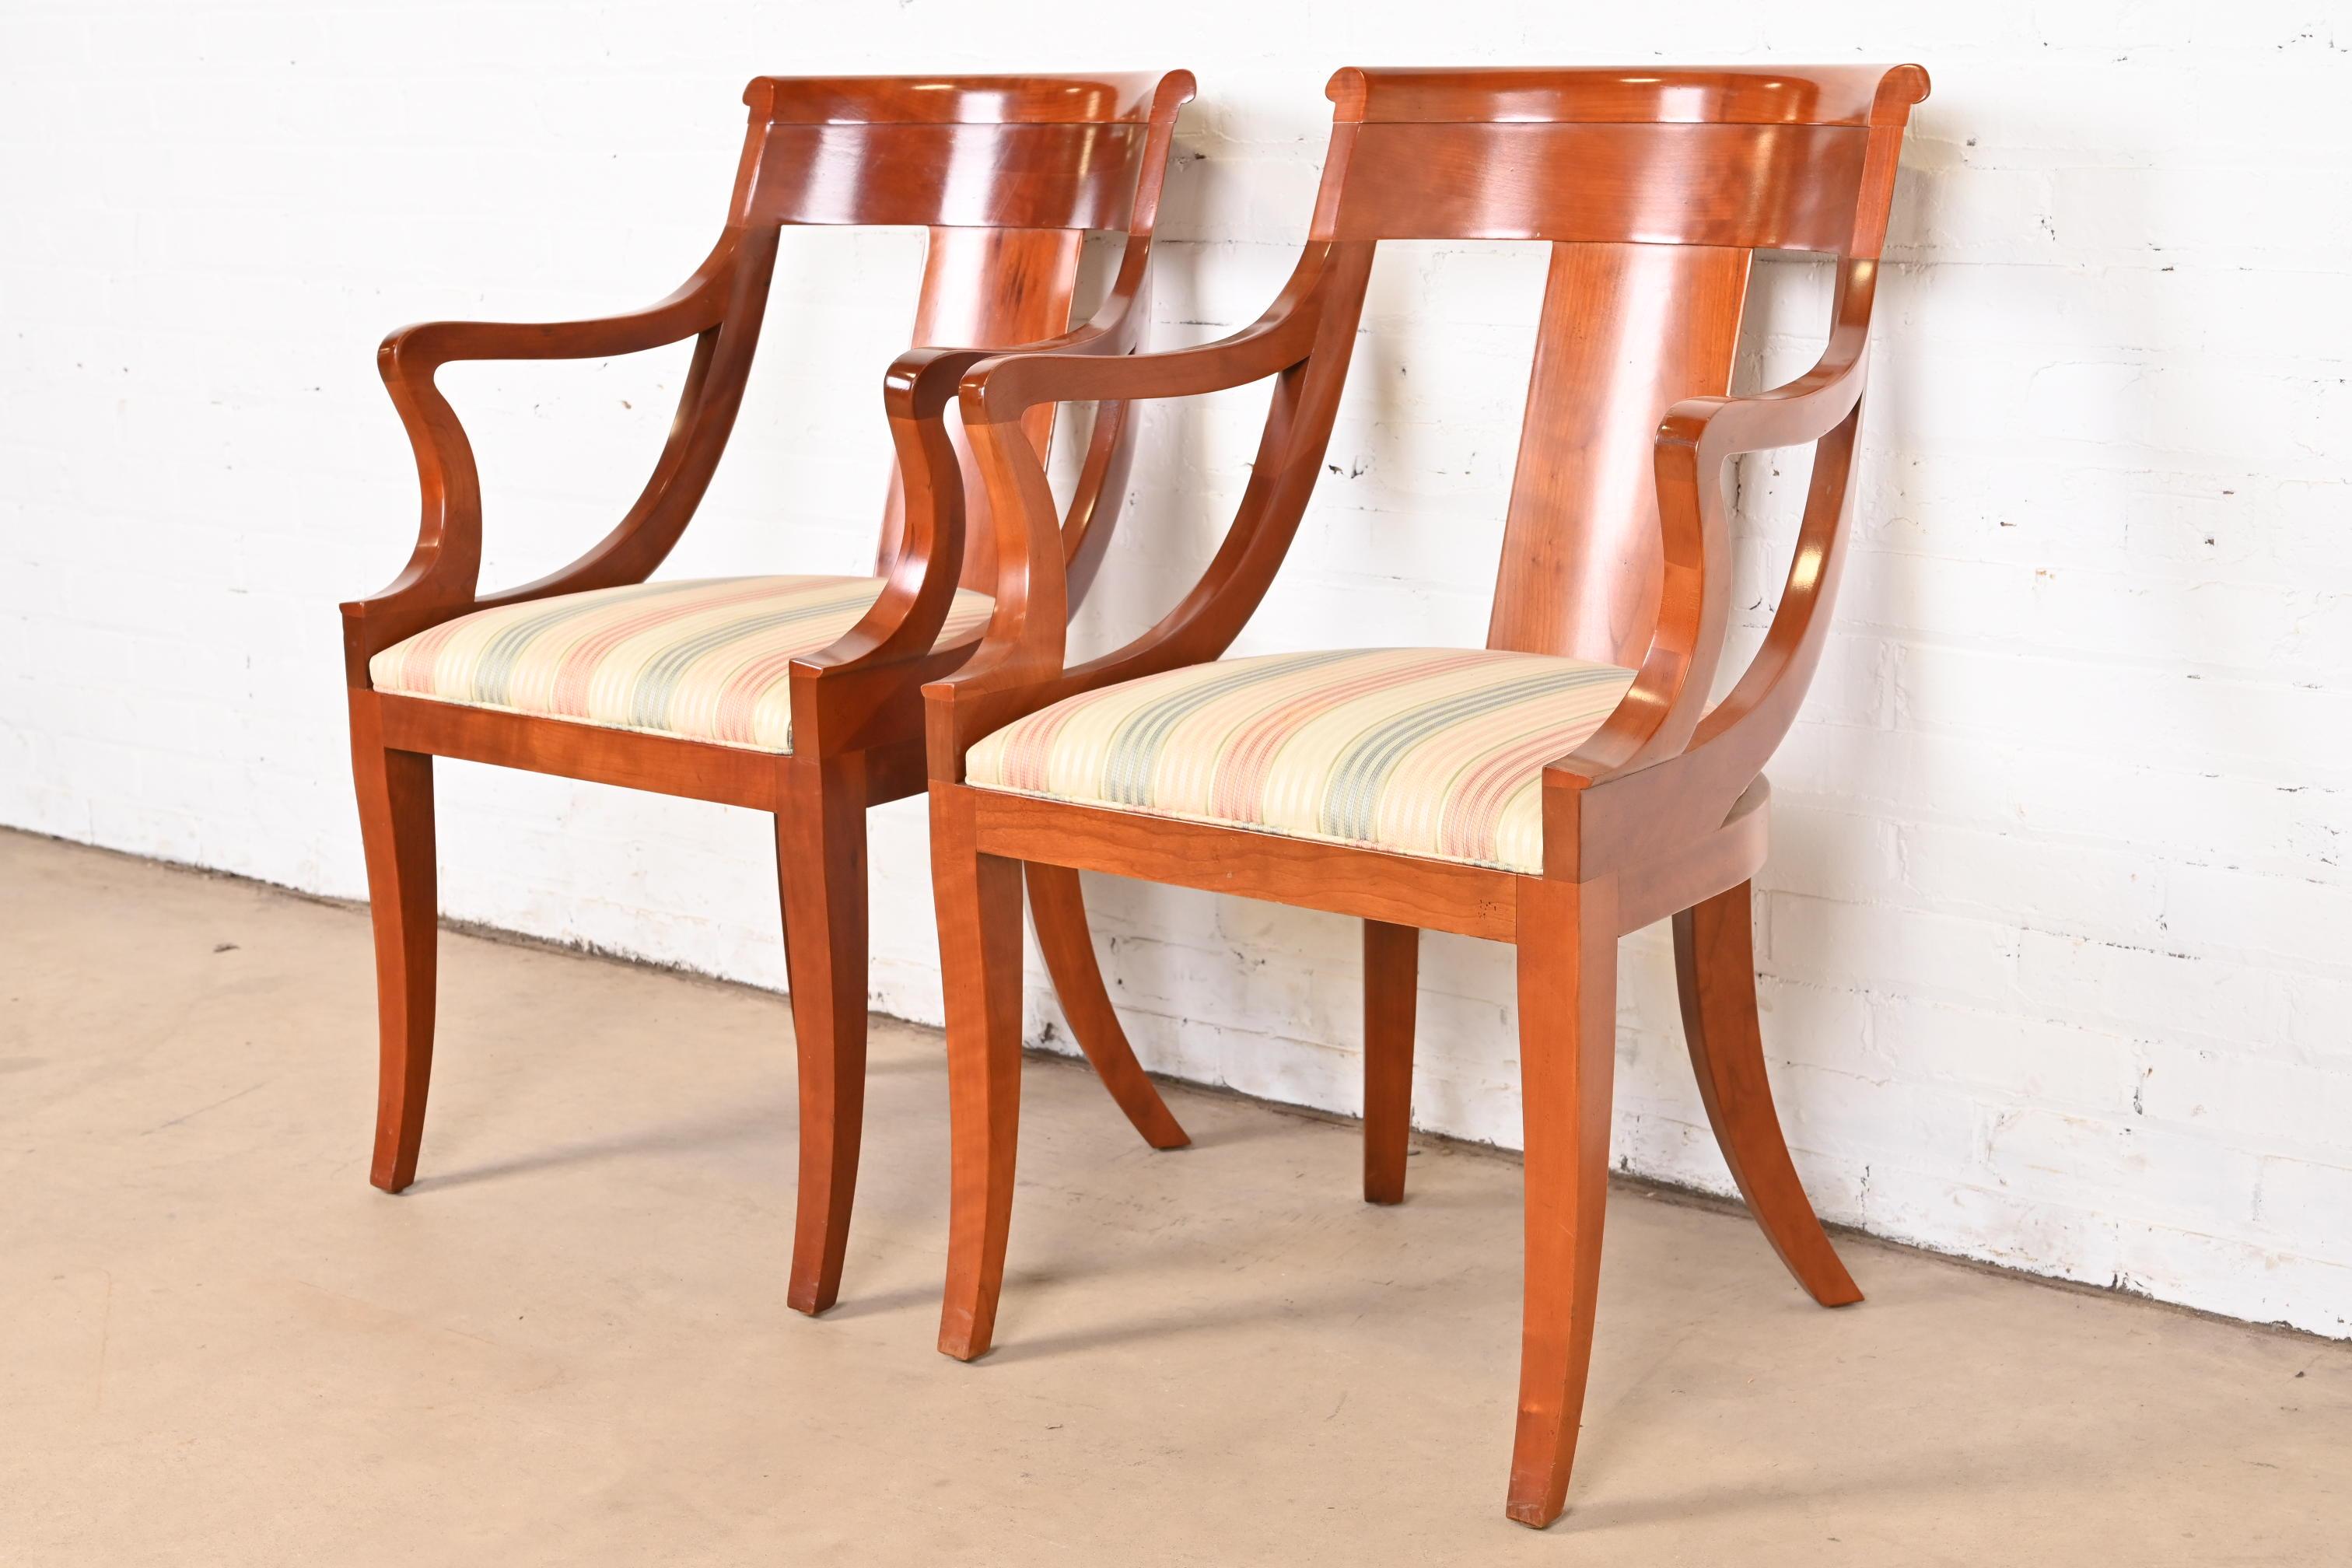 Late 20th Century Baker Furniture Solid Cherry Wood Regency Arm Chairs, Pair For Sale